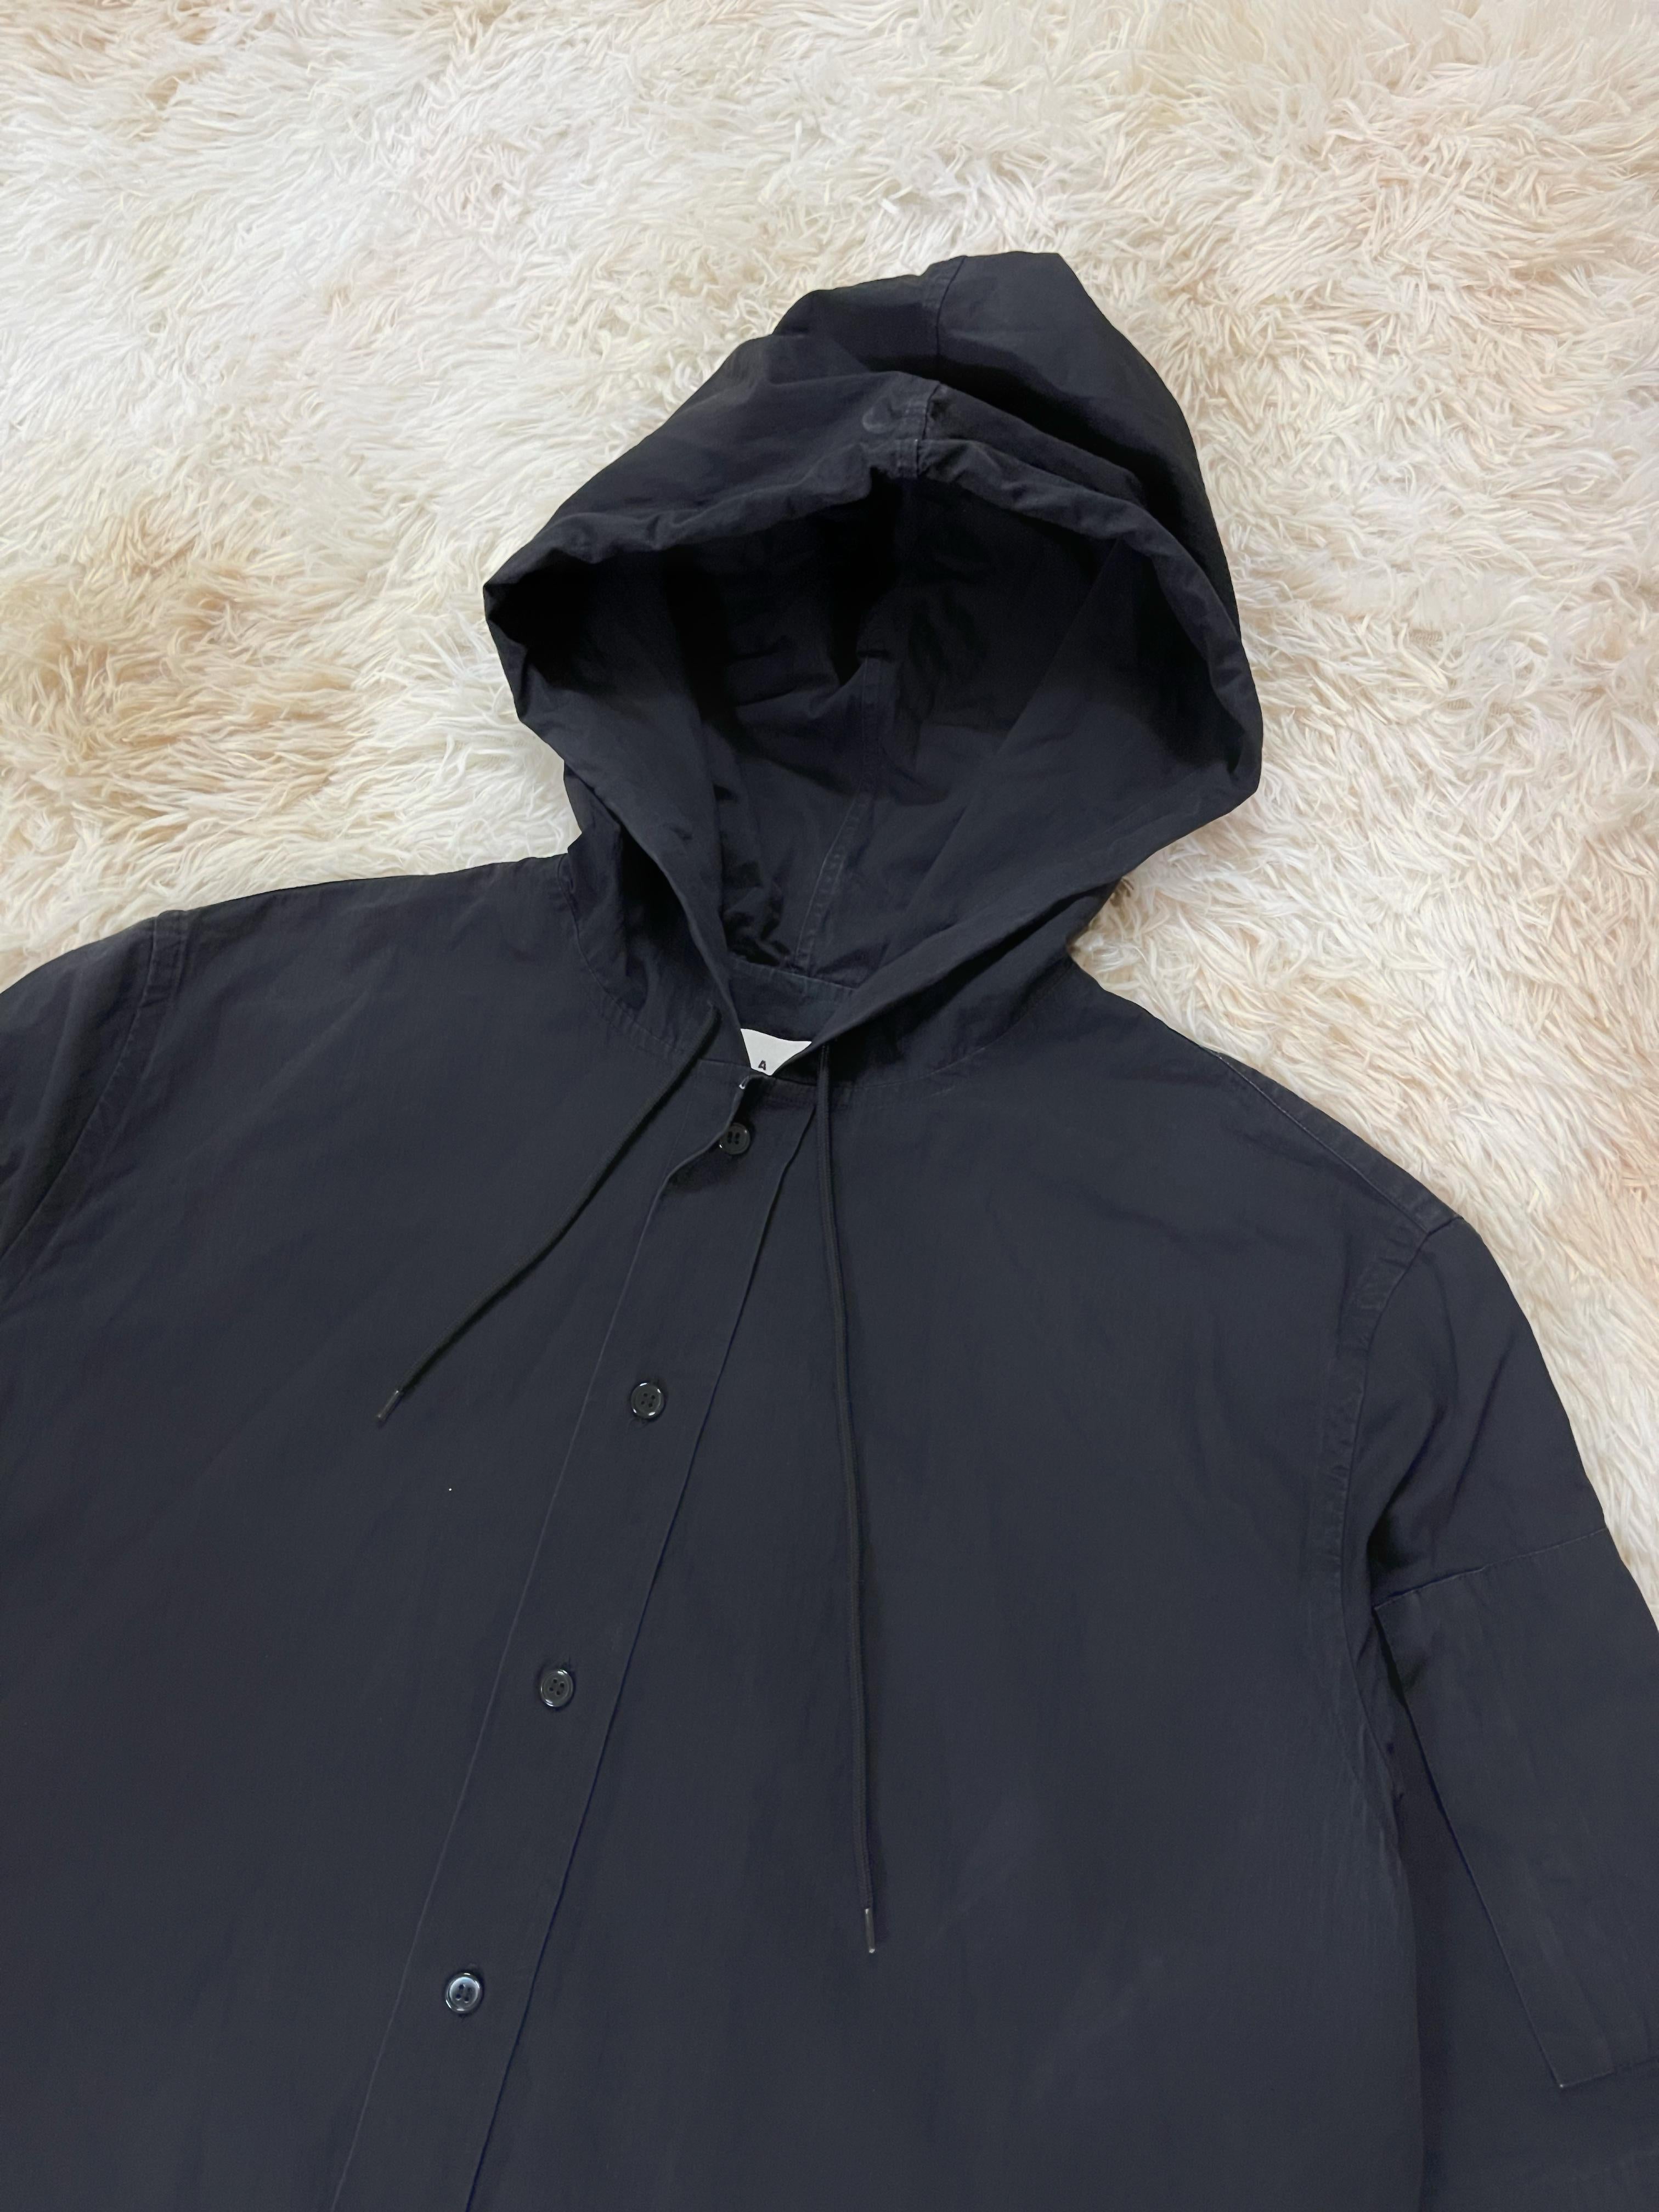 Hooded Nylon shirt by Marni, perfect for layering or wear alone.

Size on tag: Not listed, feels like M

Condition: 8/10, minor signs of usage.

Feels free to message me with any questions regarding inquiries.
